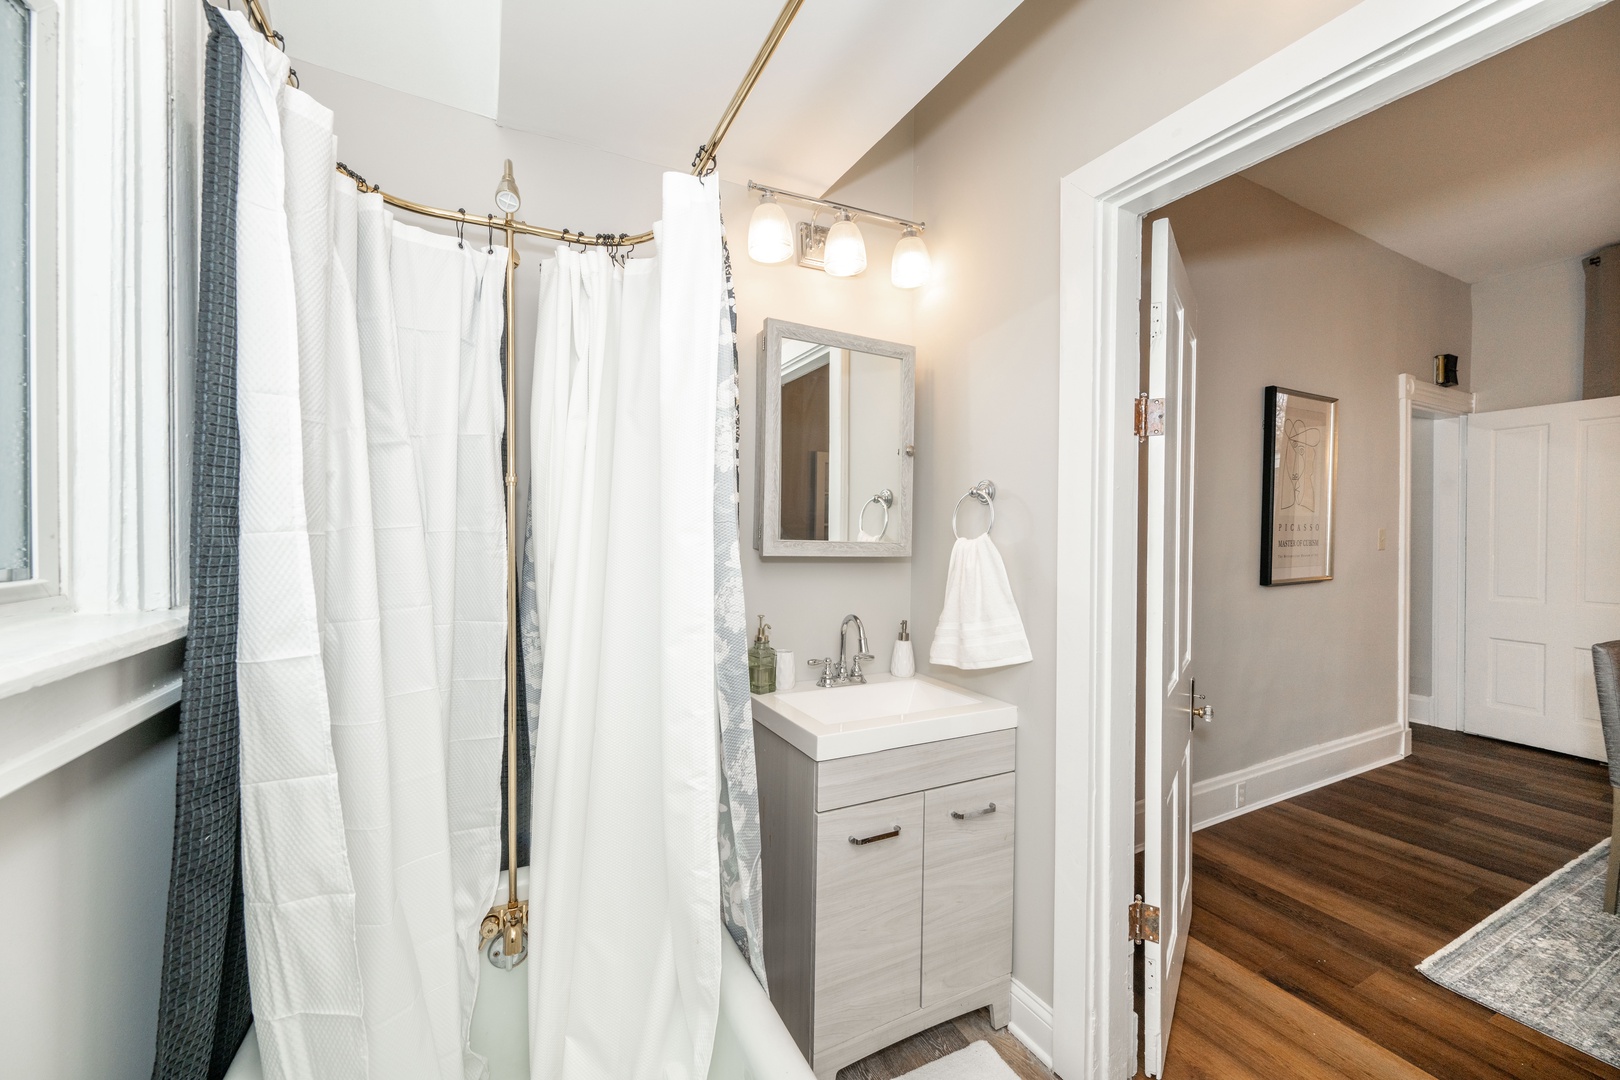 The 1st floor full bath includes a single vanity & shower/claw foot tub combo